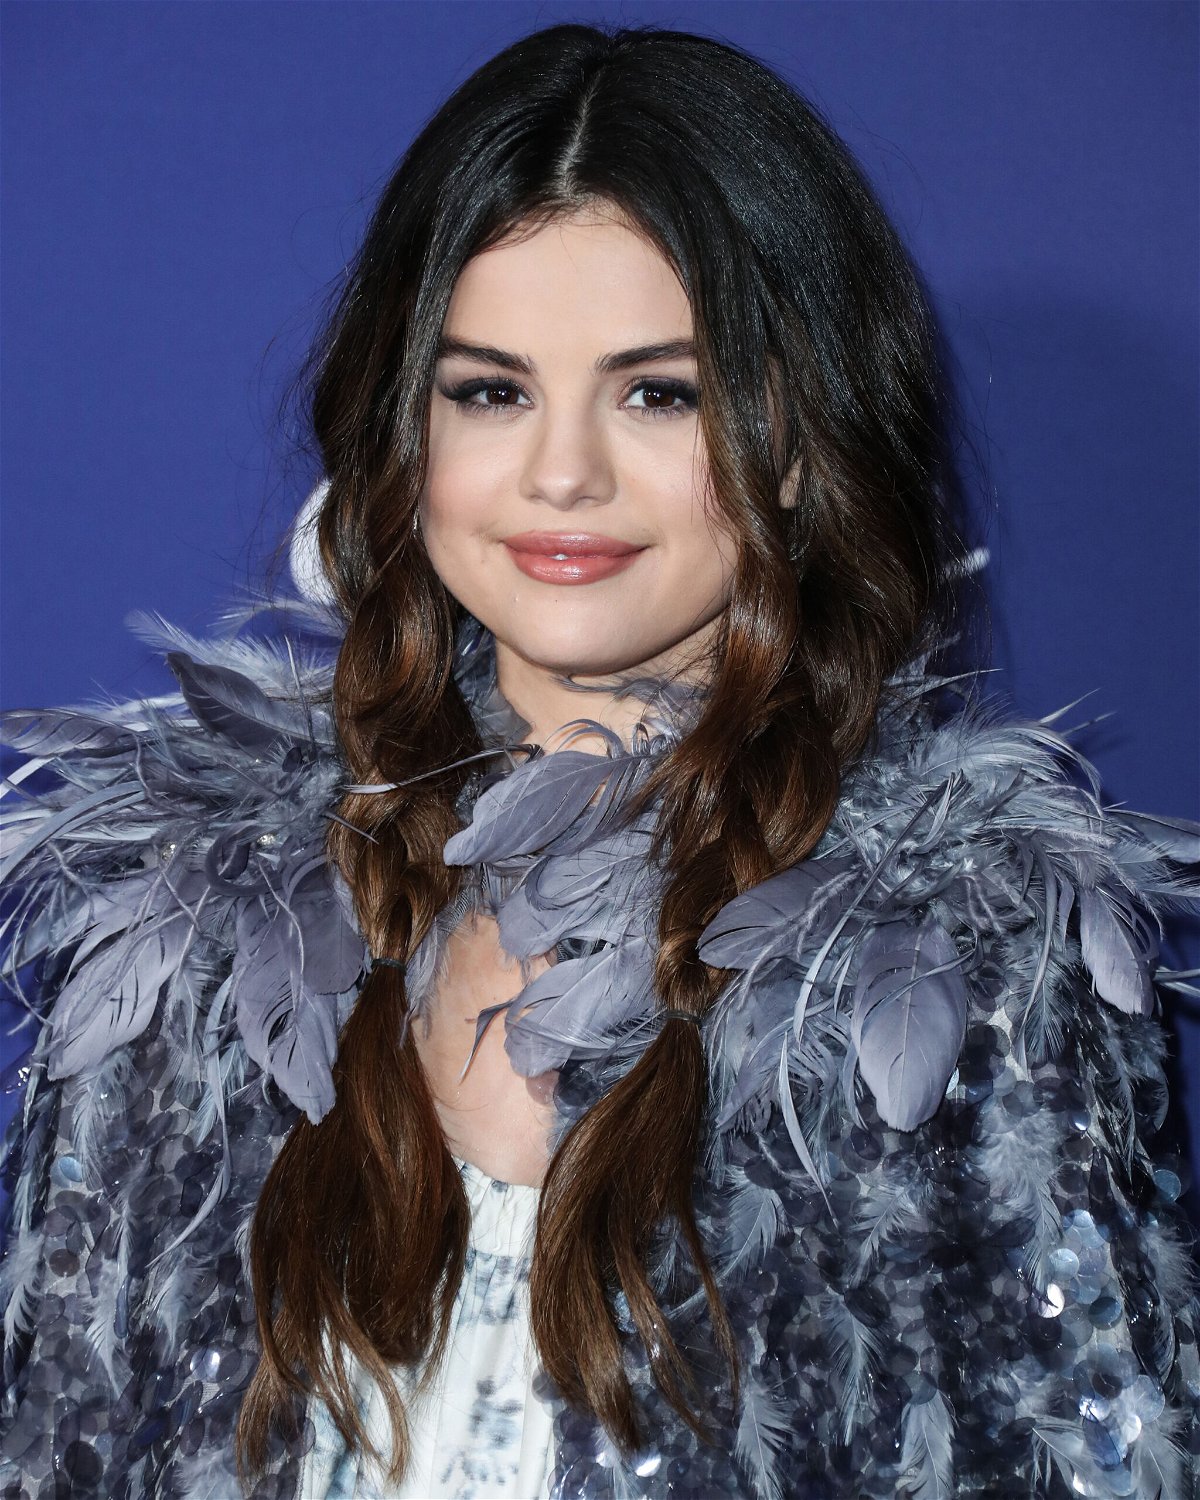 Selena Gomez Launches Line to Support Mental Health – The Wildcat